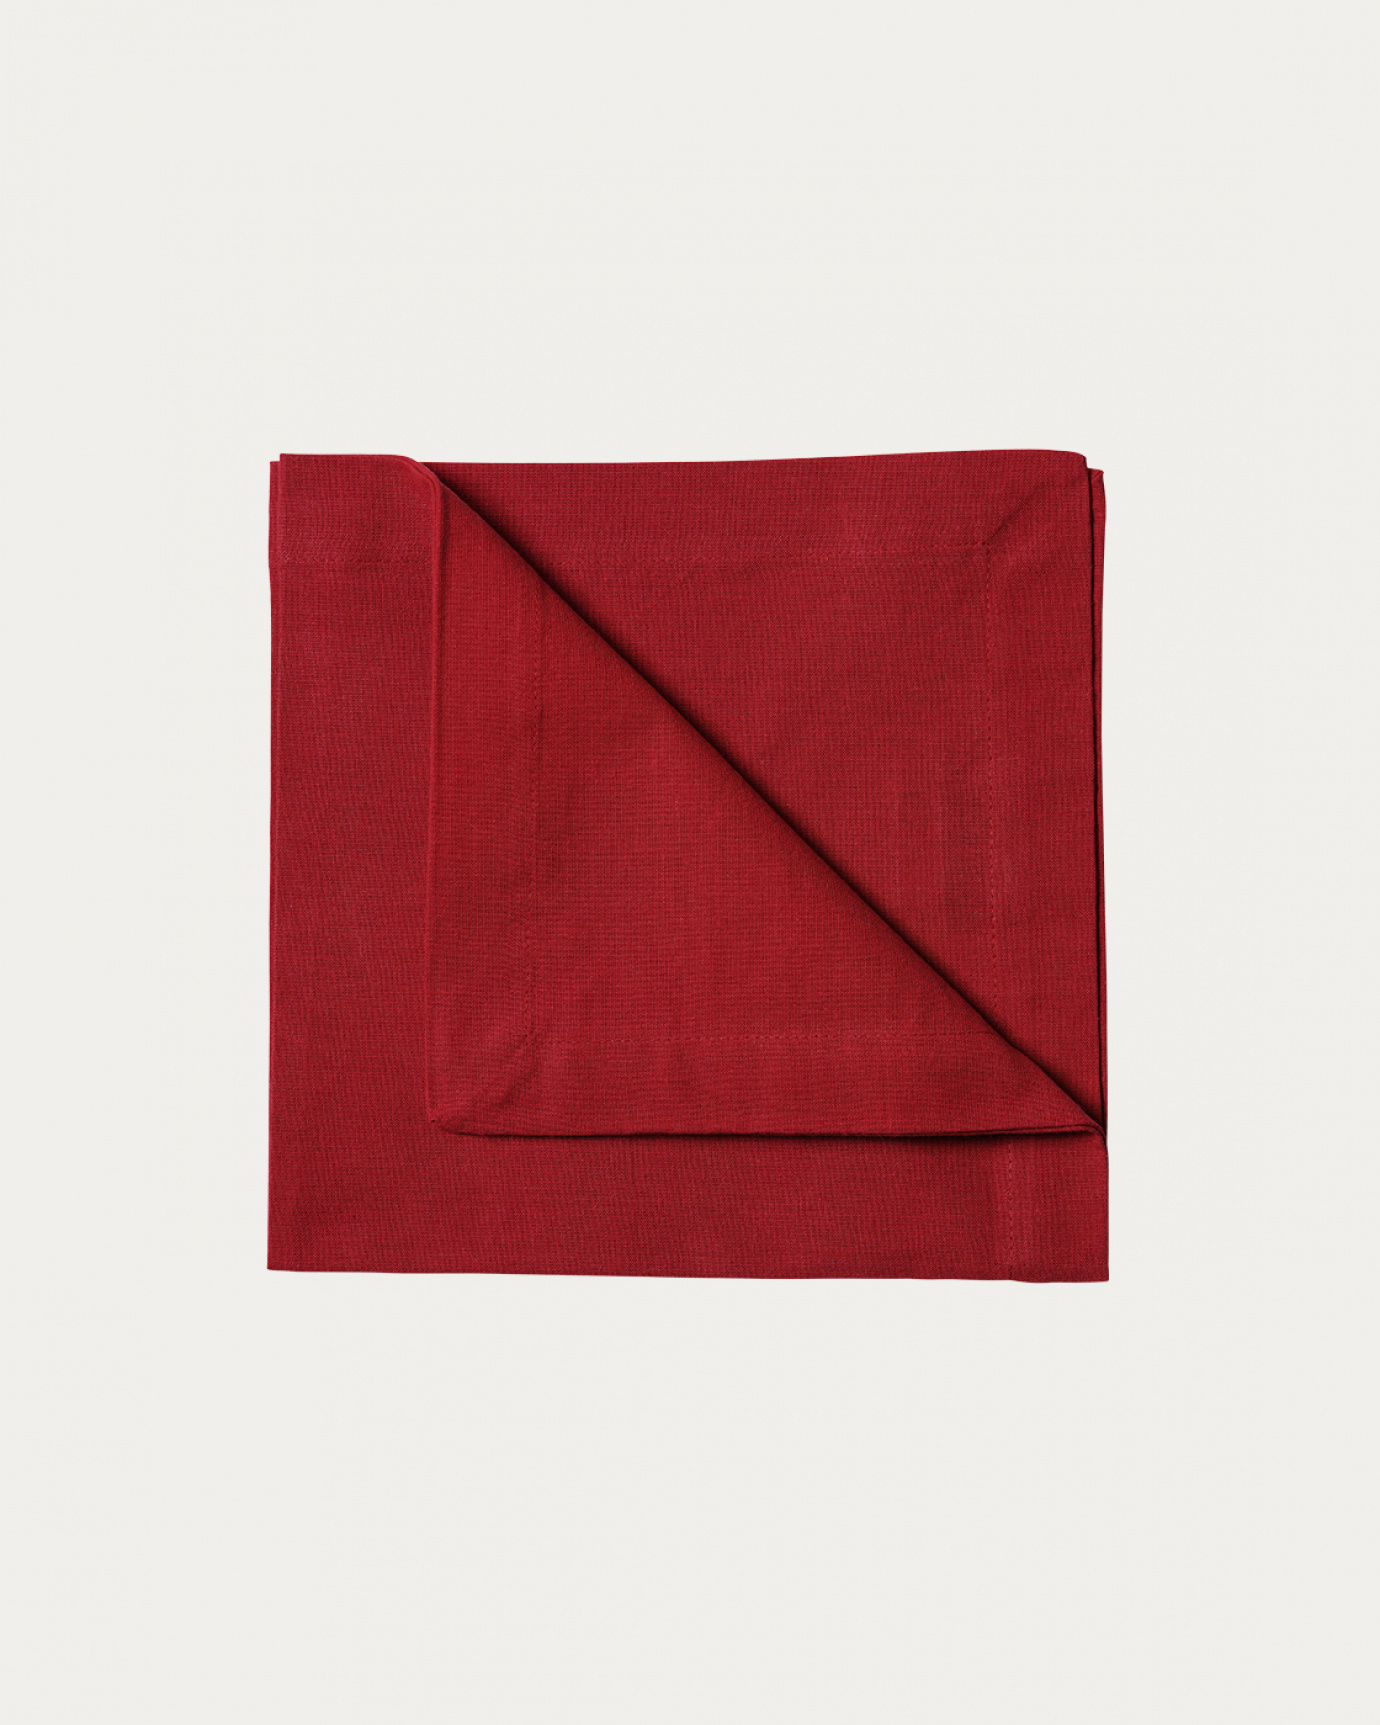 Product image red ROBERT napkin made of soft cotton from LINUM DESIGN. Size 45x45 cm and sold in 4-pack.